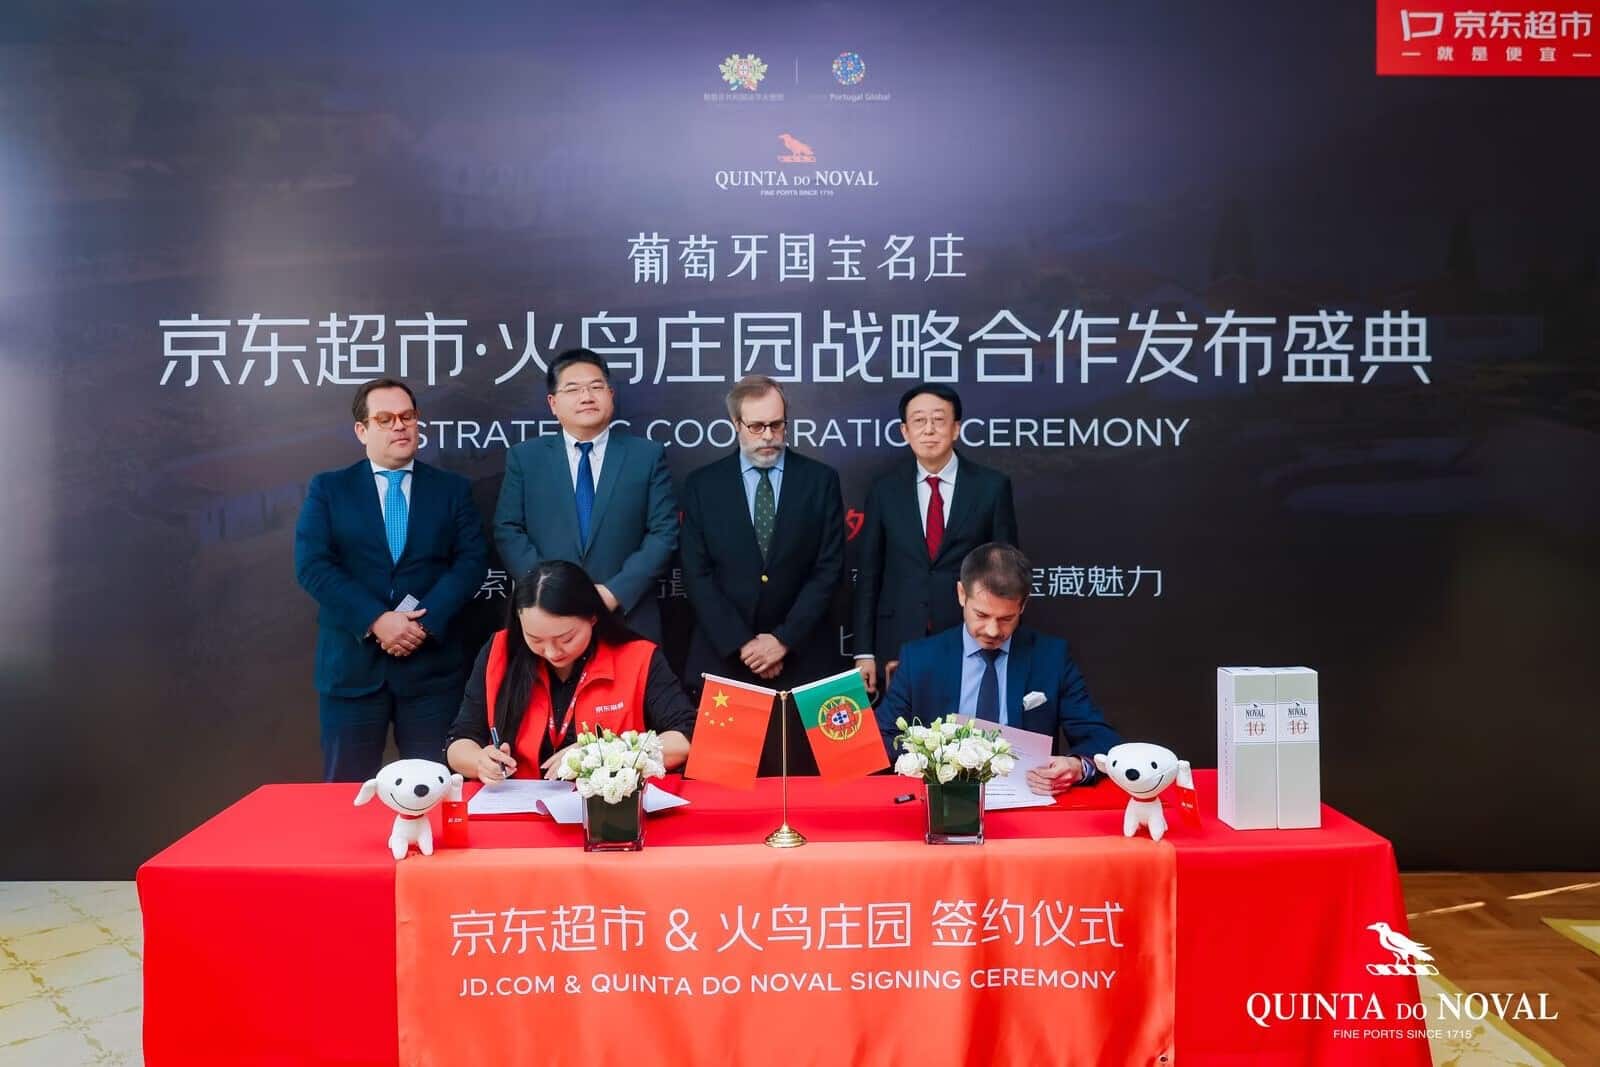 JD Super Partners with Quinta do Noval to Bring Premium Portuguese Wines to China